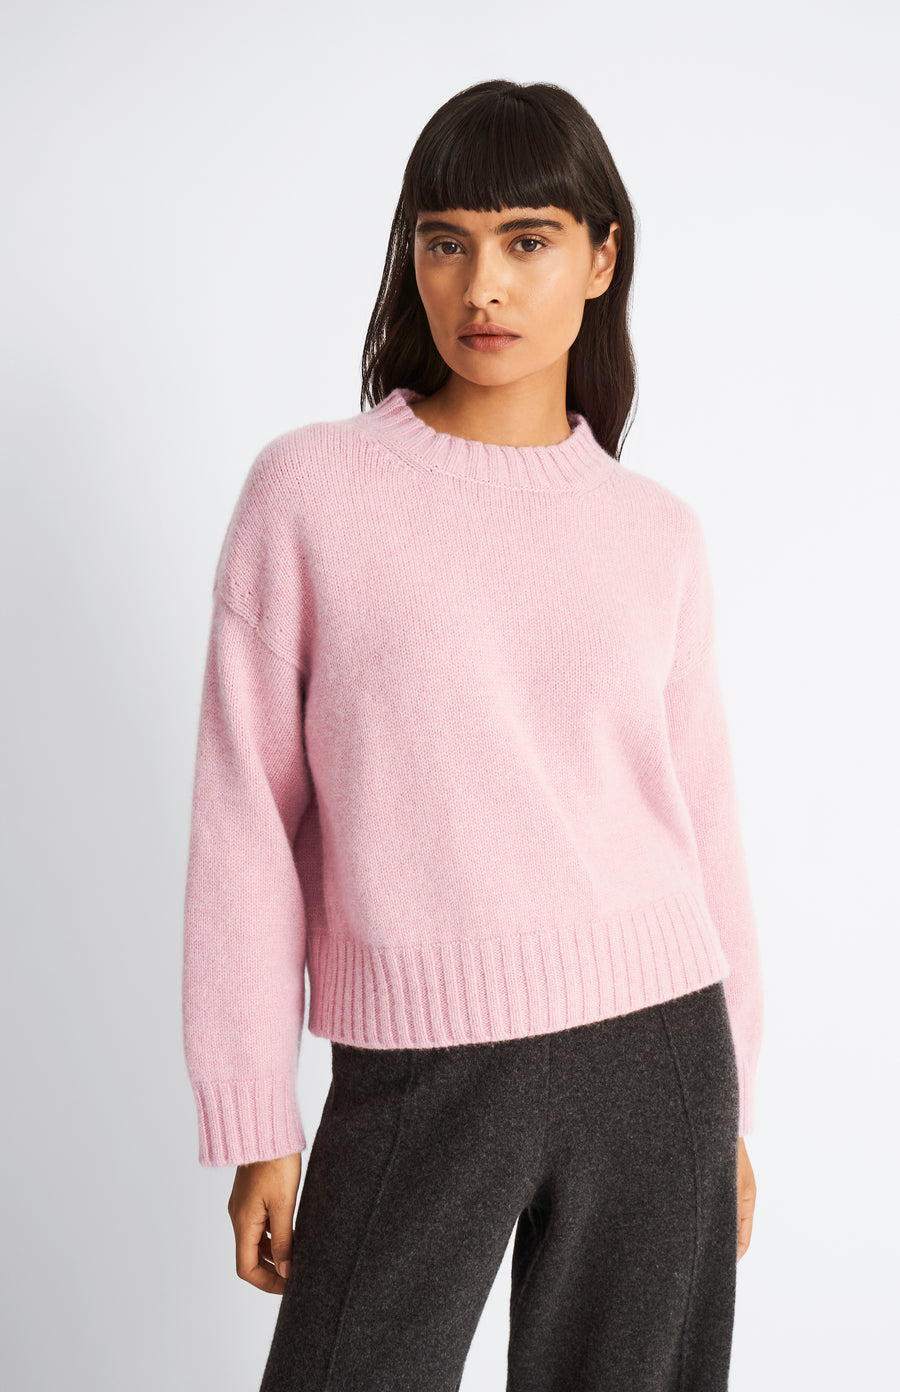 Pringle Women's Cropped Round Neck Cosy Cashmere Jumper In Dusty Pink on model